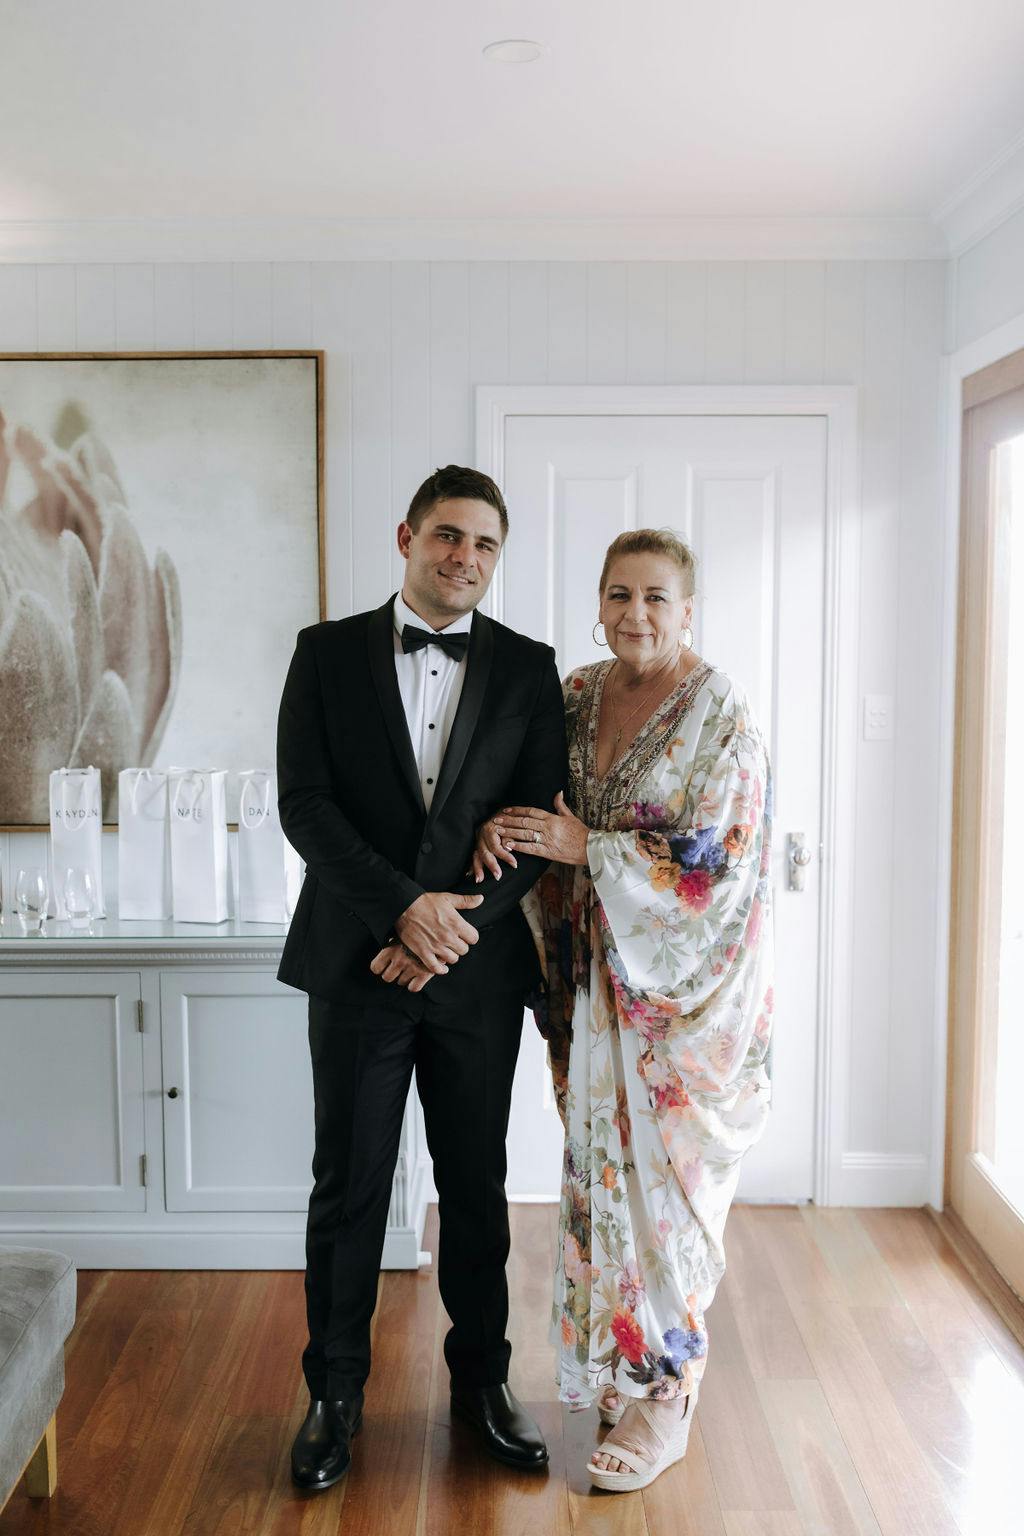 A man in a black tuxedo stands arm-in-arm with a woman in a floral dress. They are indoors in a well-lit room with wooden floors and white walls, with a cabinet and some gift bags behind them. Both are smiling towards the camera.